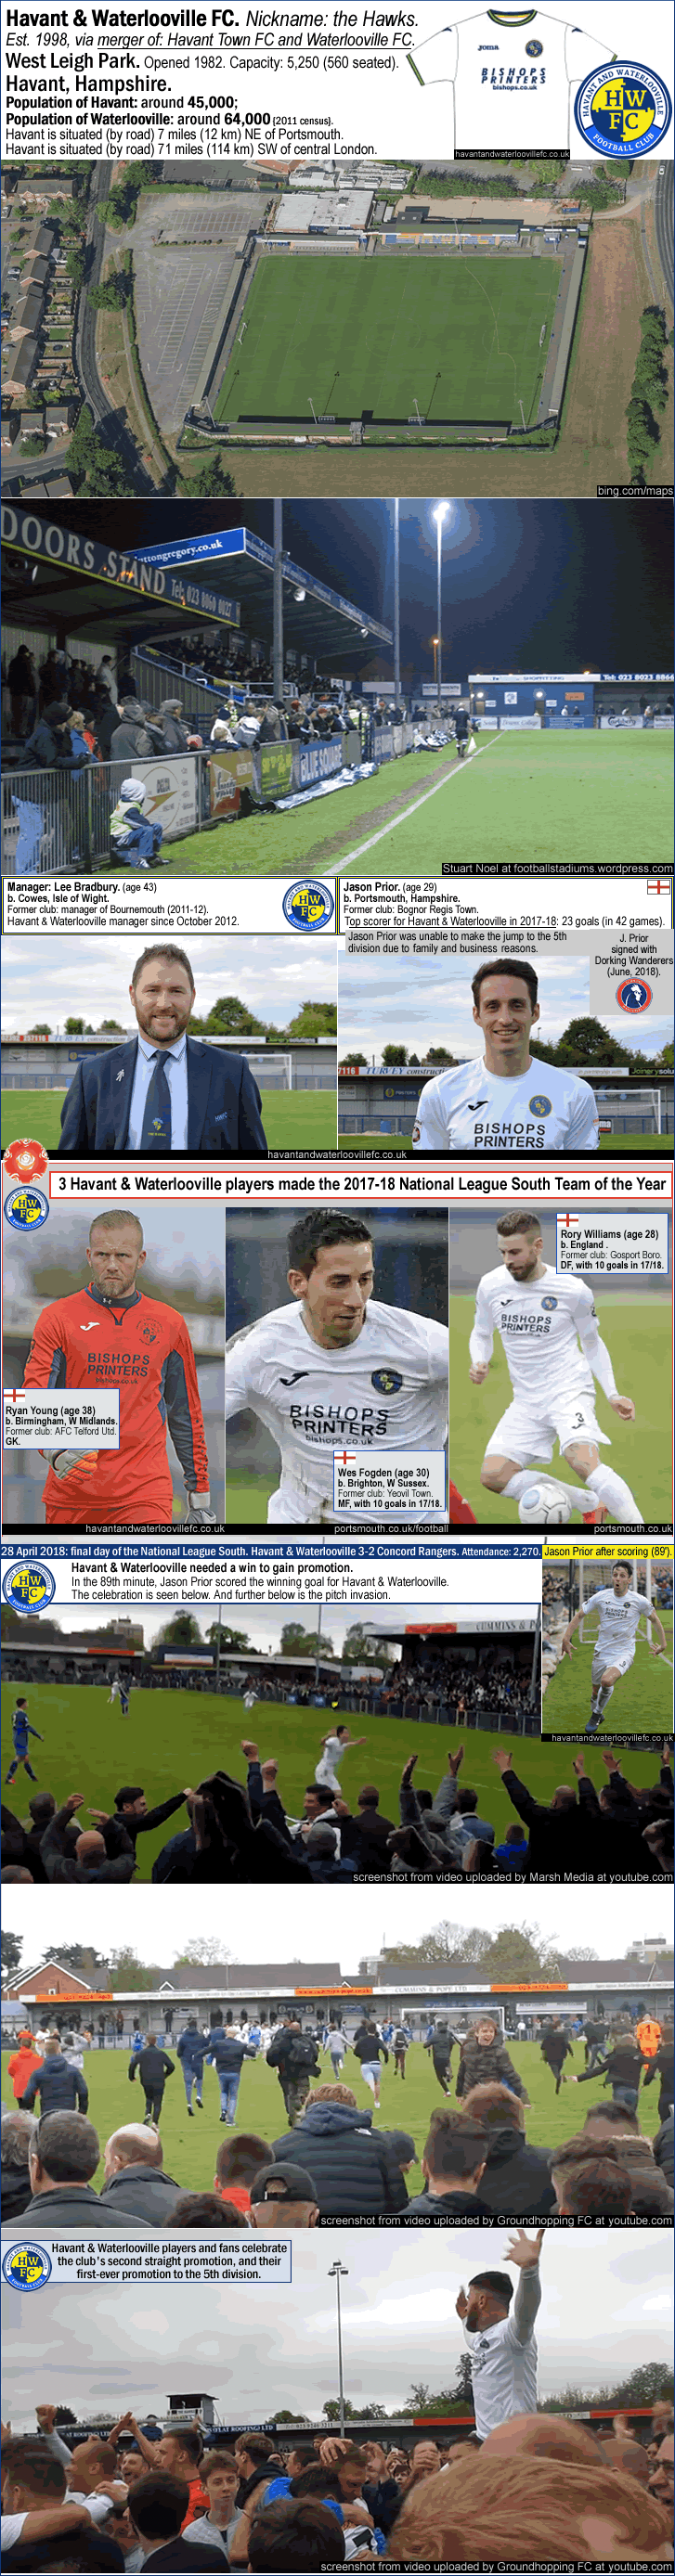 havant-and-waterlooville_promoted-2018_west-leigh-park_lee-bradbury_ryan-young_wes-fogden_rory-williams_jason-prior_m_.gif